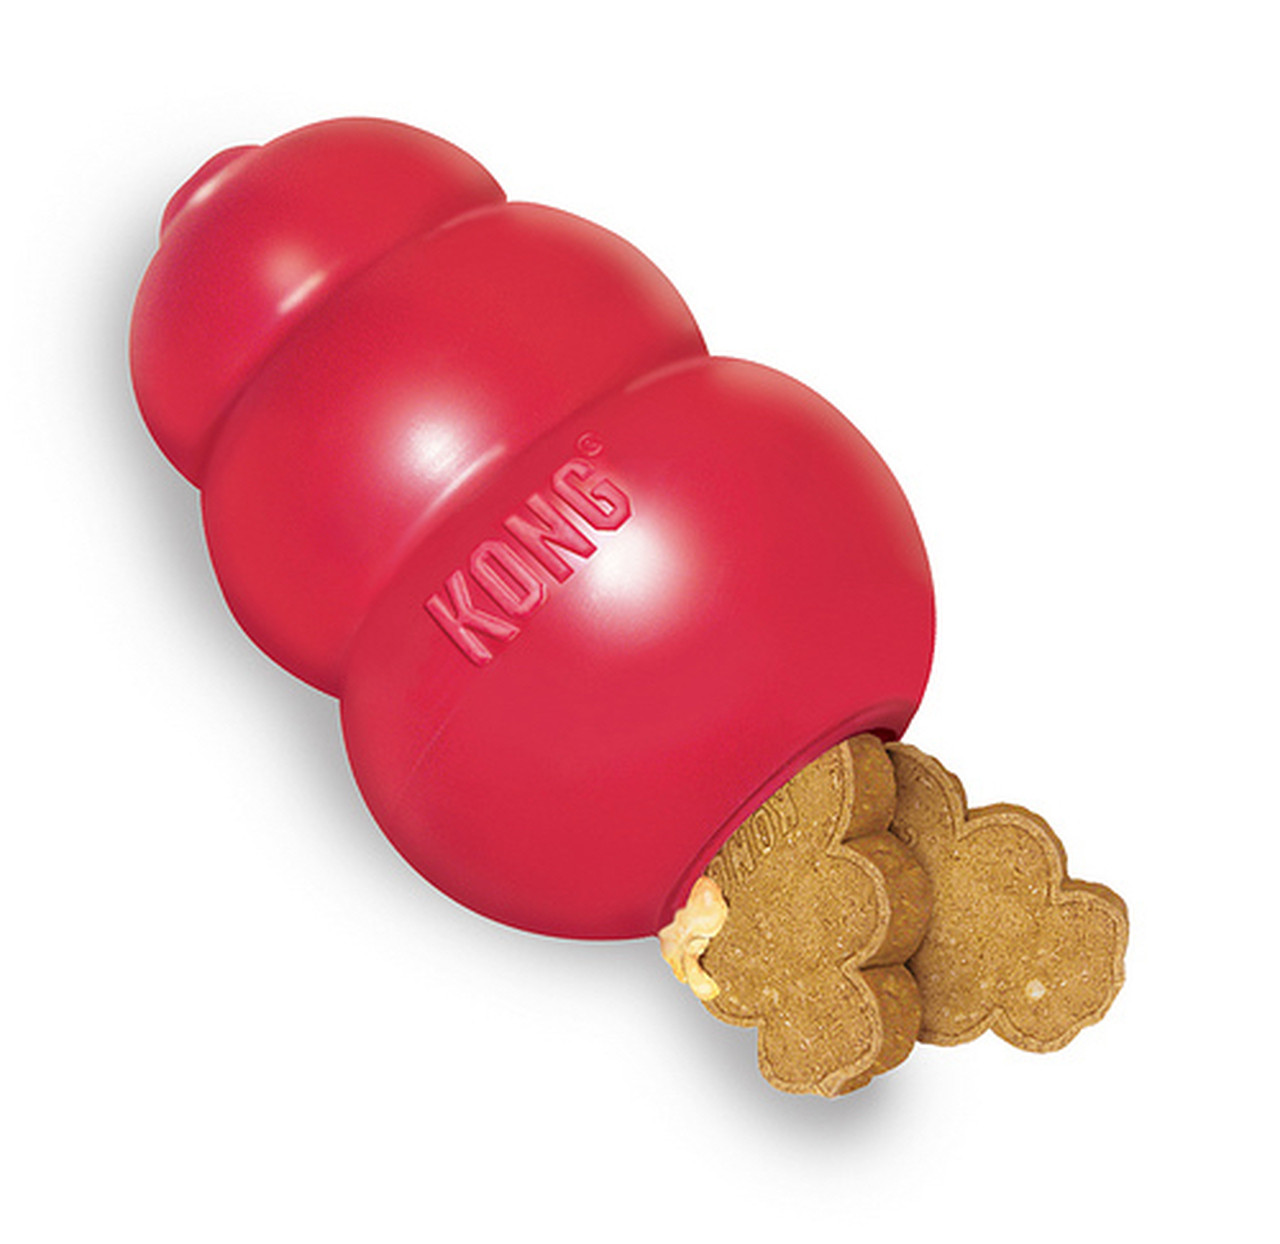 KONG Puppy Dog Toy For Small Dogs